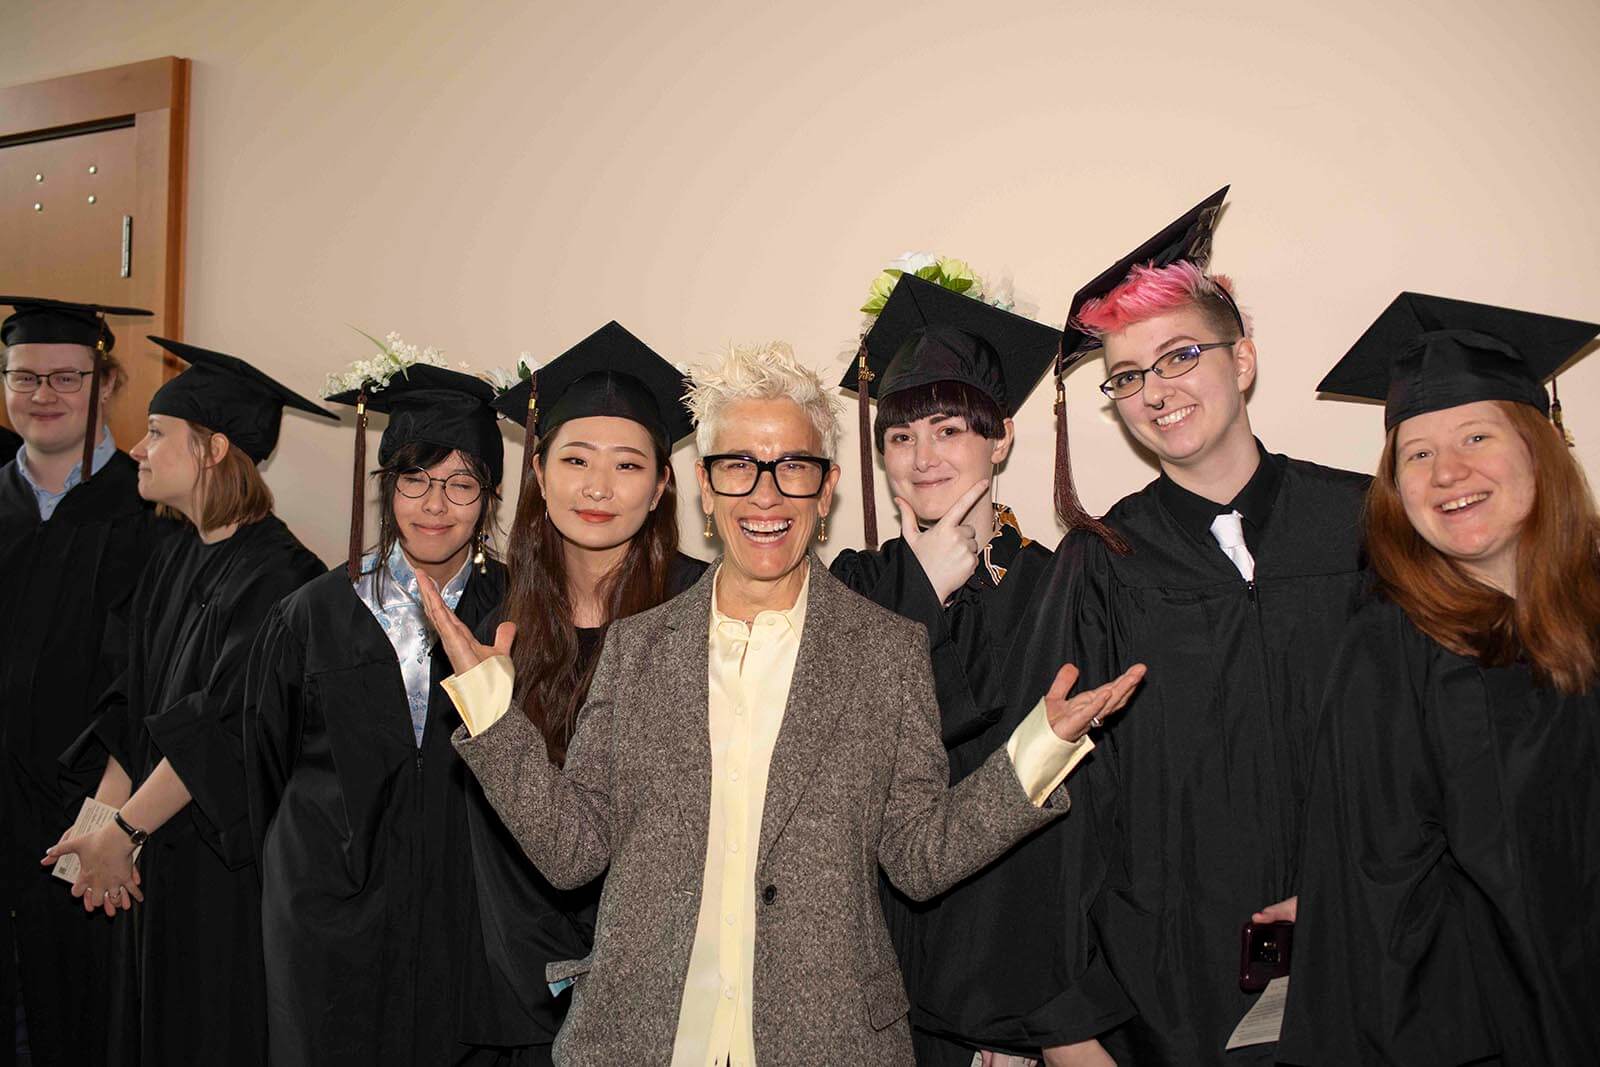 Patti Dobrowolski smiles posing with a group of students in graduate robes and mortarboards.